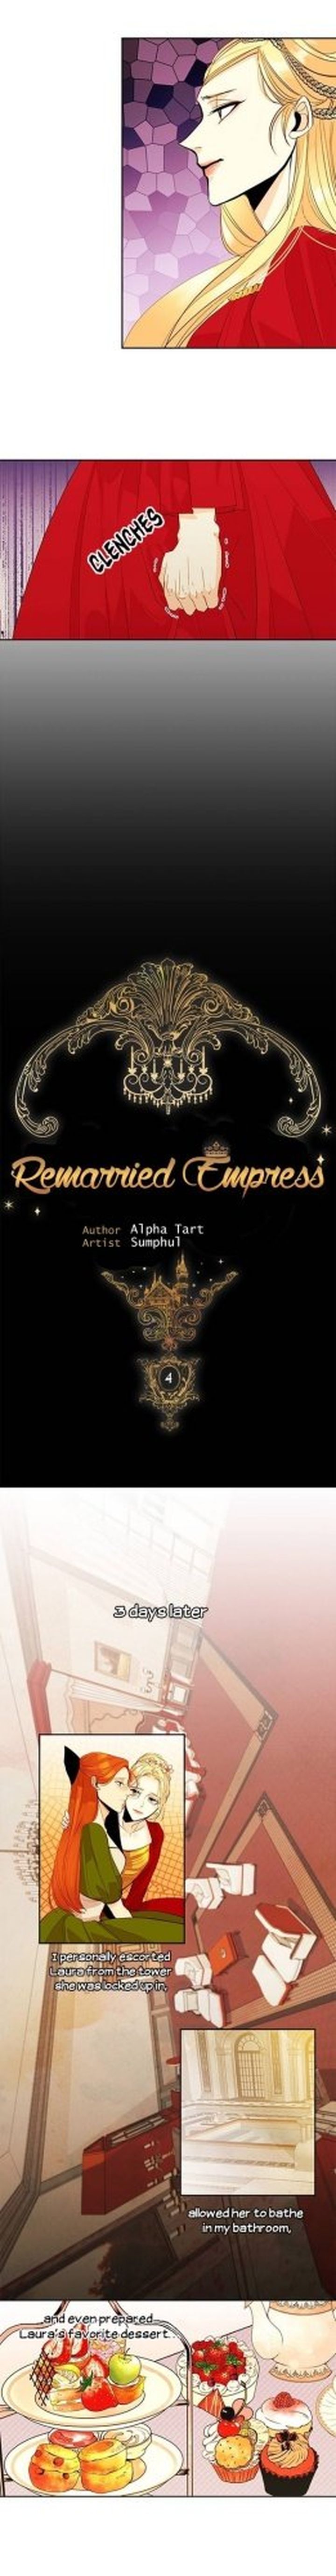 the_remarried_empress_4_4